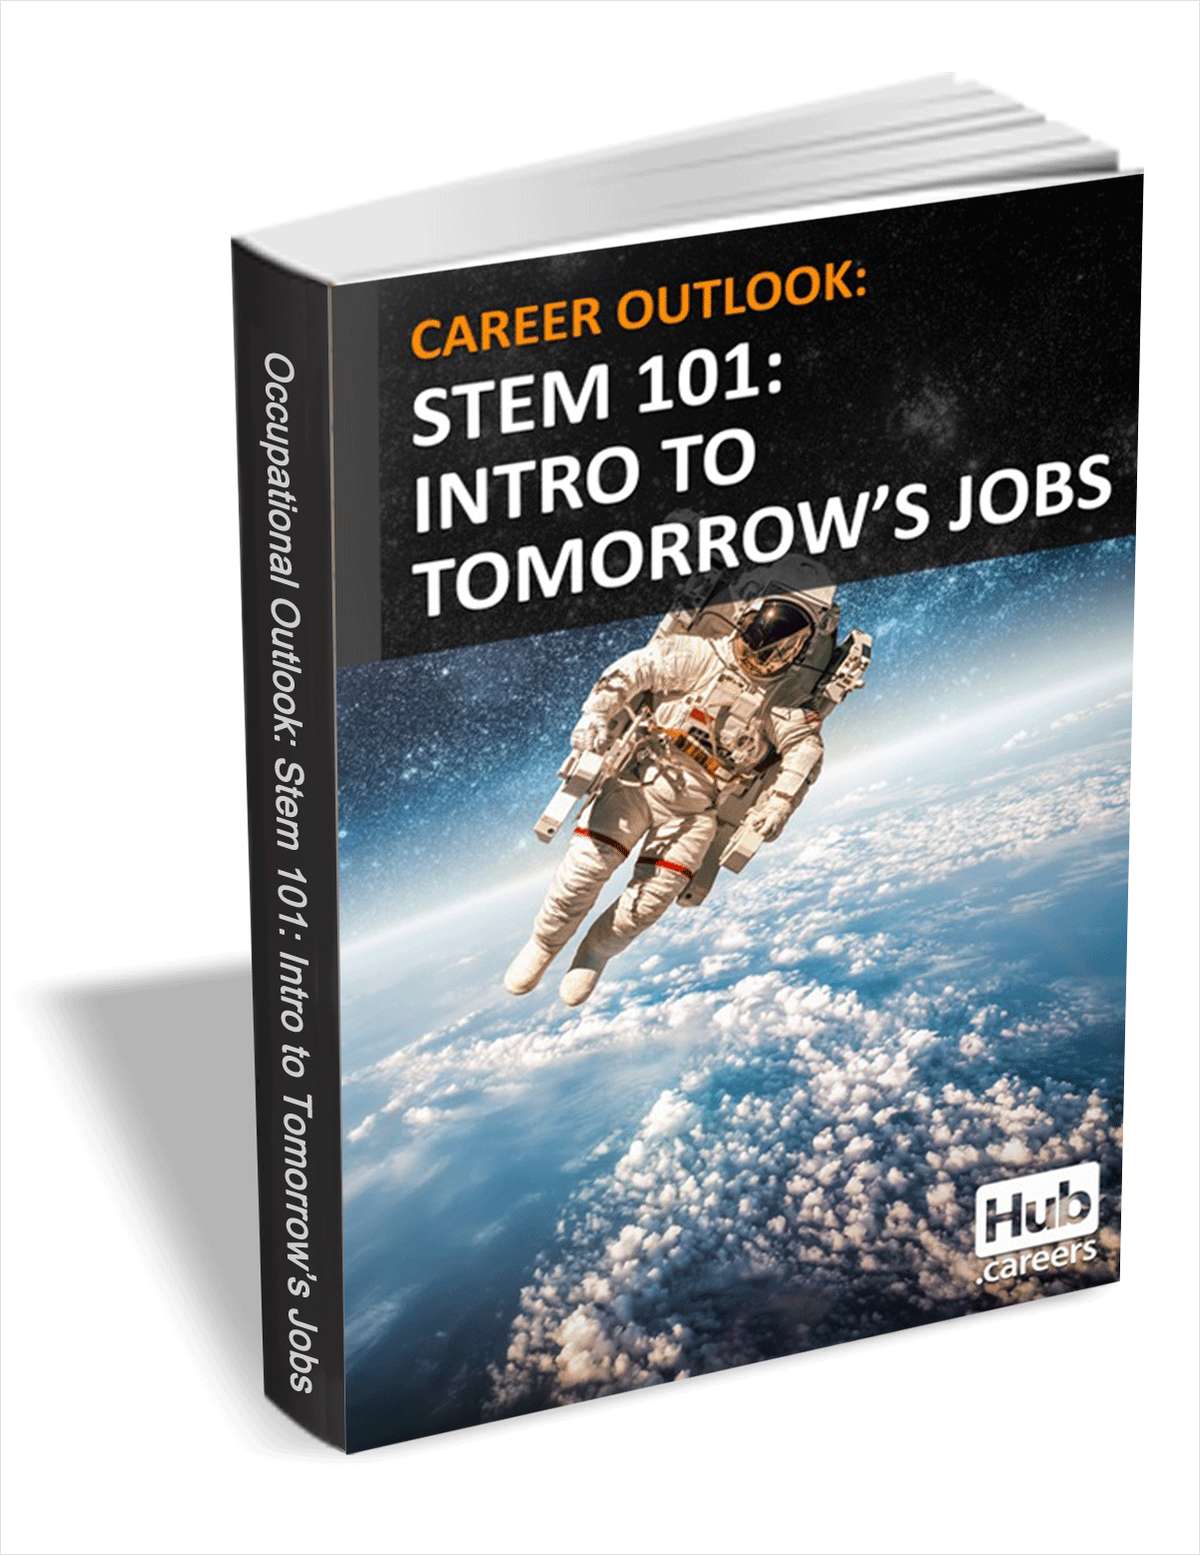 STEM 101: Intro to Tomorrow's Jobs - Career Outlook